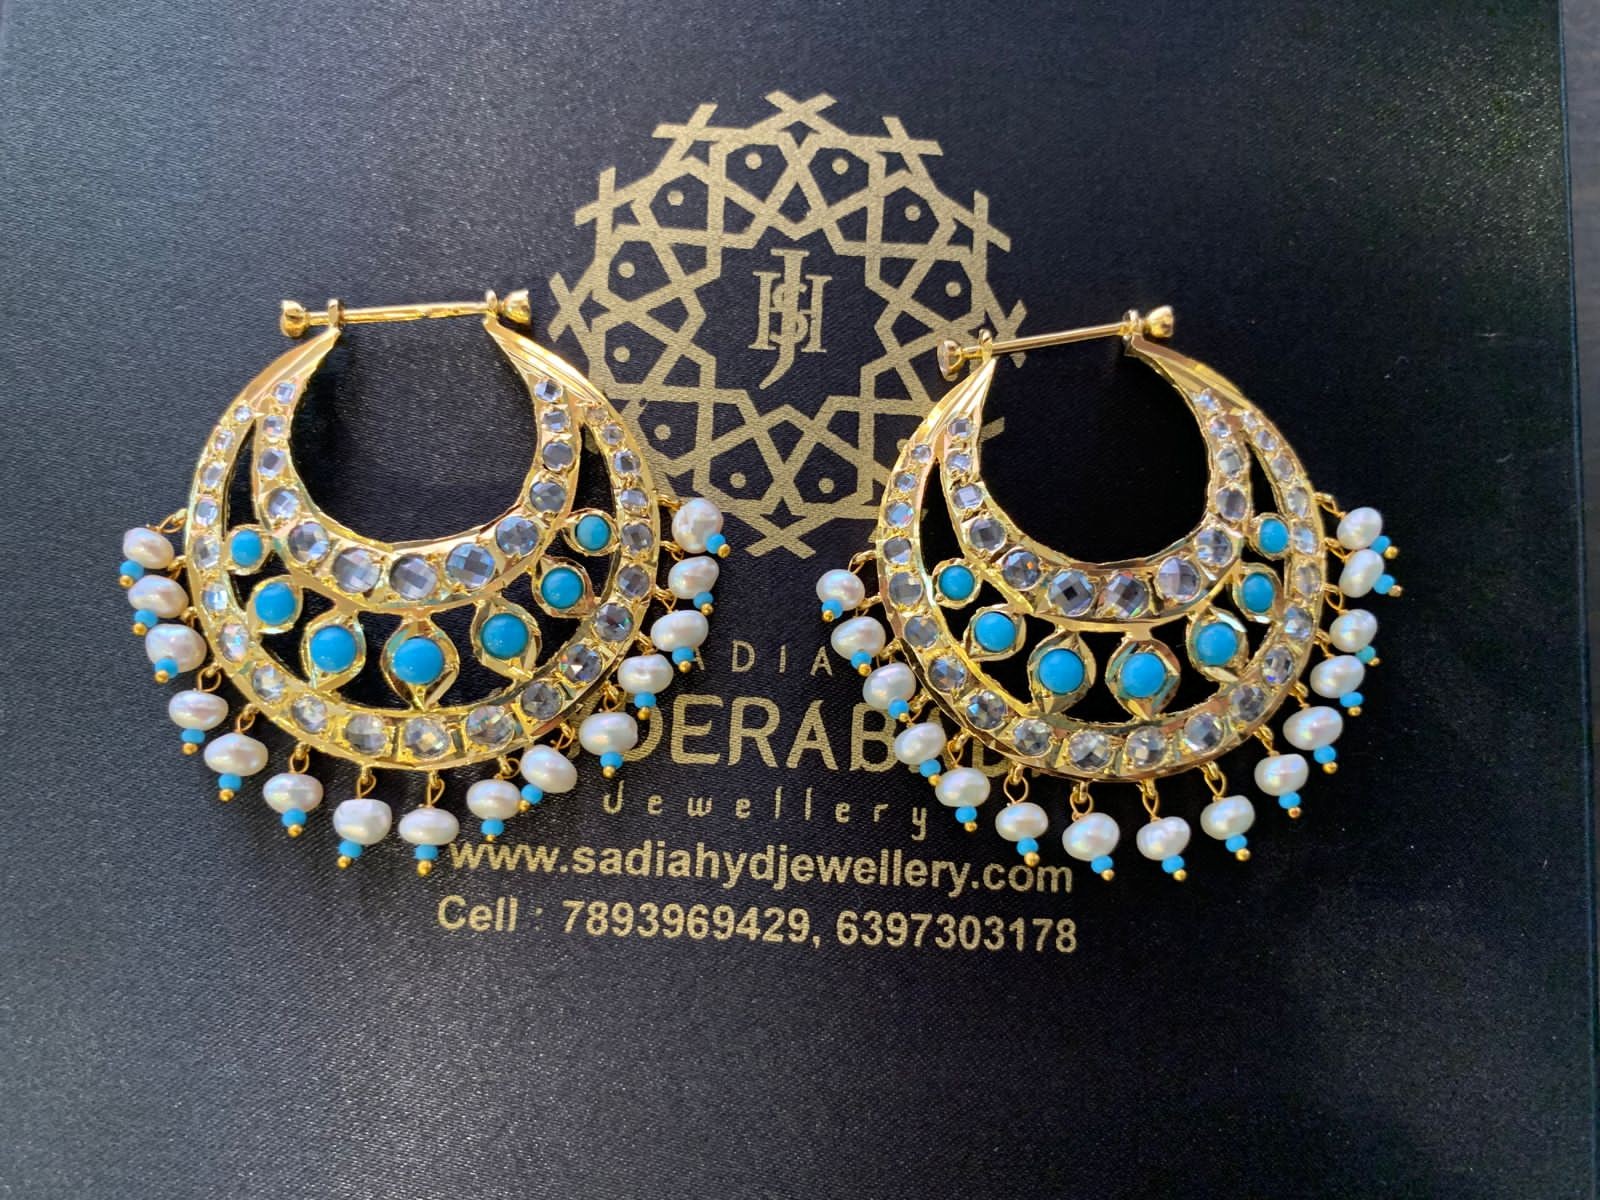 up to 1 Gram Gold Forming Chand Bali Design Ear Rings – The Raj Ratna